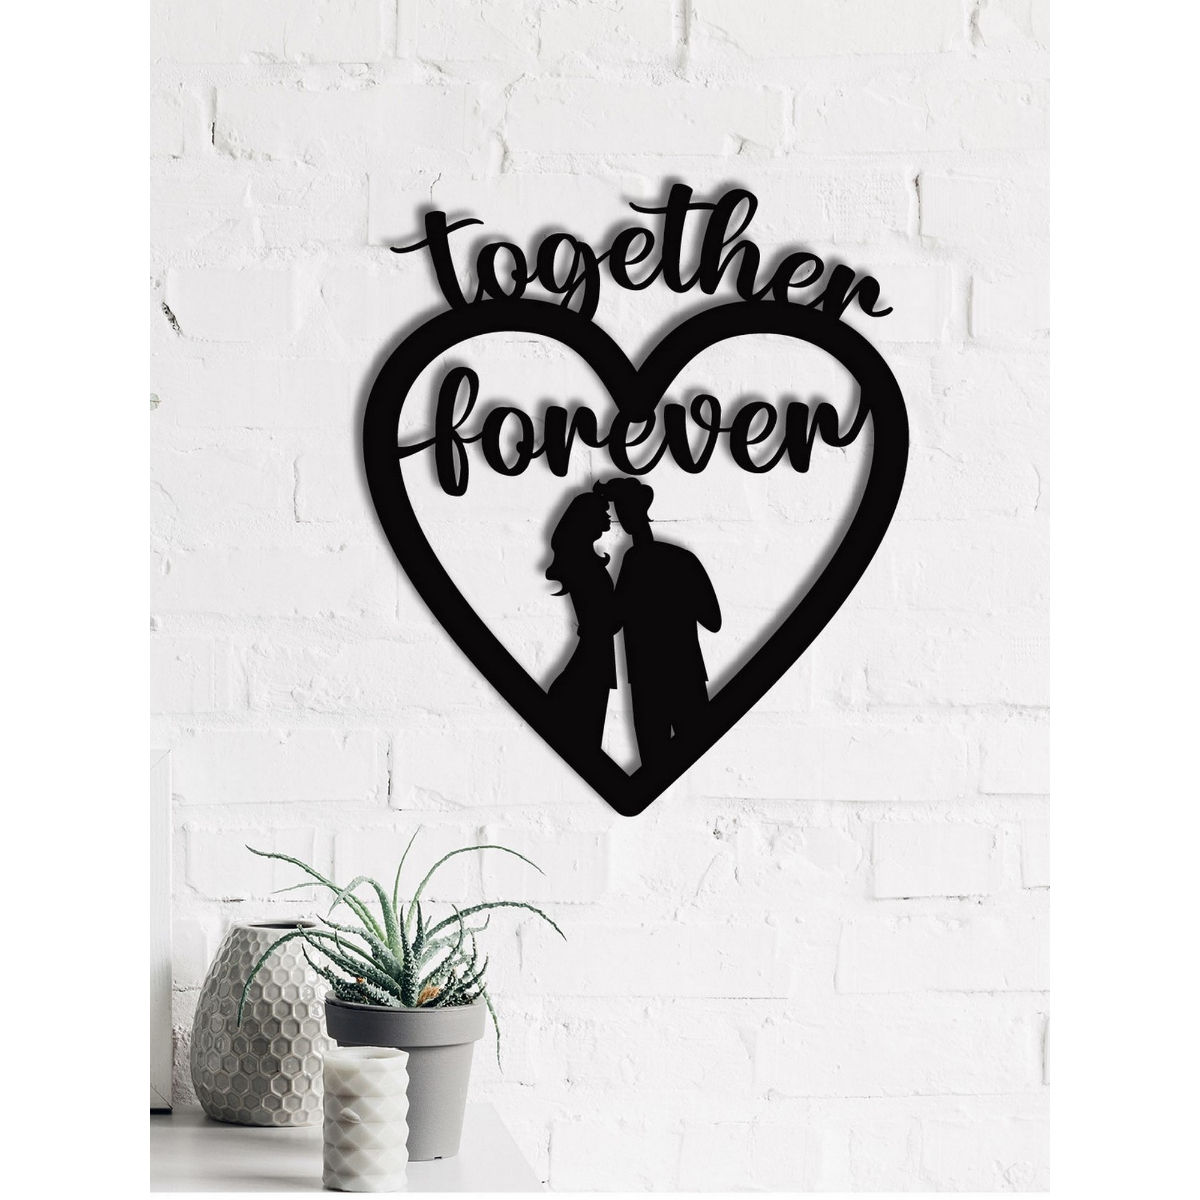 eCraftIndia "Together Forever" Love Theme Black Wood Wall Art Cutout